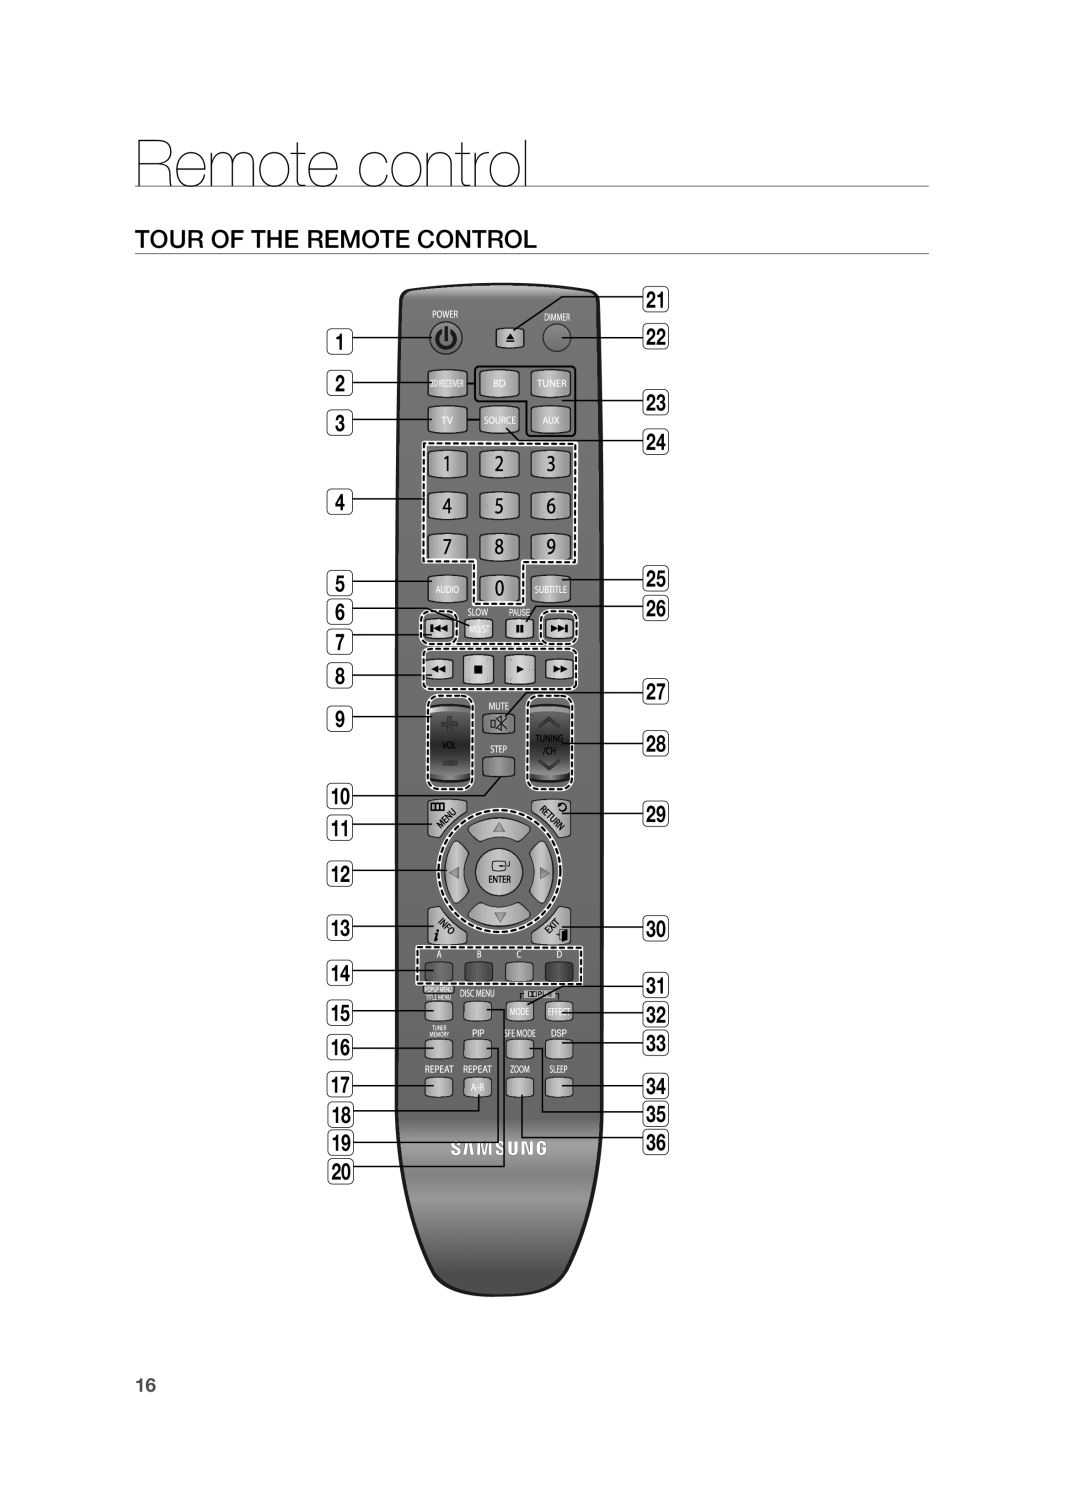 Samsung AH68-02231A user manual Remote control, Tour Of The Remote Control, 1 2 3 4 5 6 7 8 9 10 11 12 13 14 15 16 17 18 19 